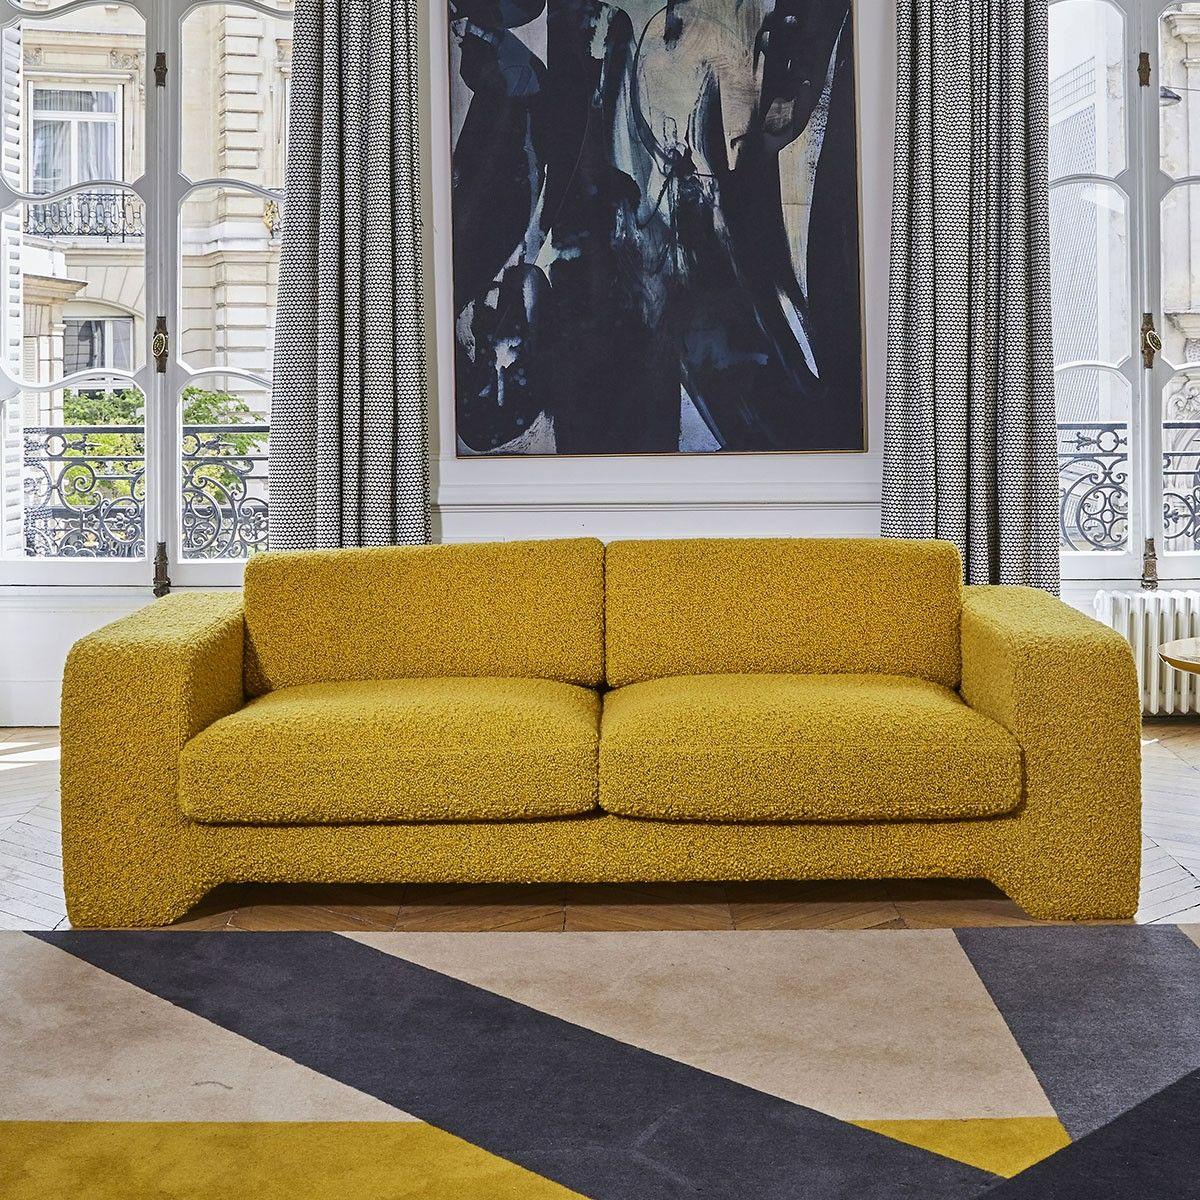 Popus Editions Giovanna 3 seater sofa in Almond Green Como Velvet Upholstery

Giovanna is a sofa with a strong profile. A sober, plush line, with this famous detail that changes everything, so as not to forget its strength of character and this